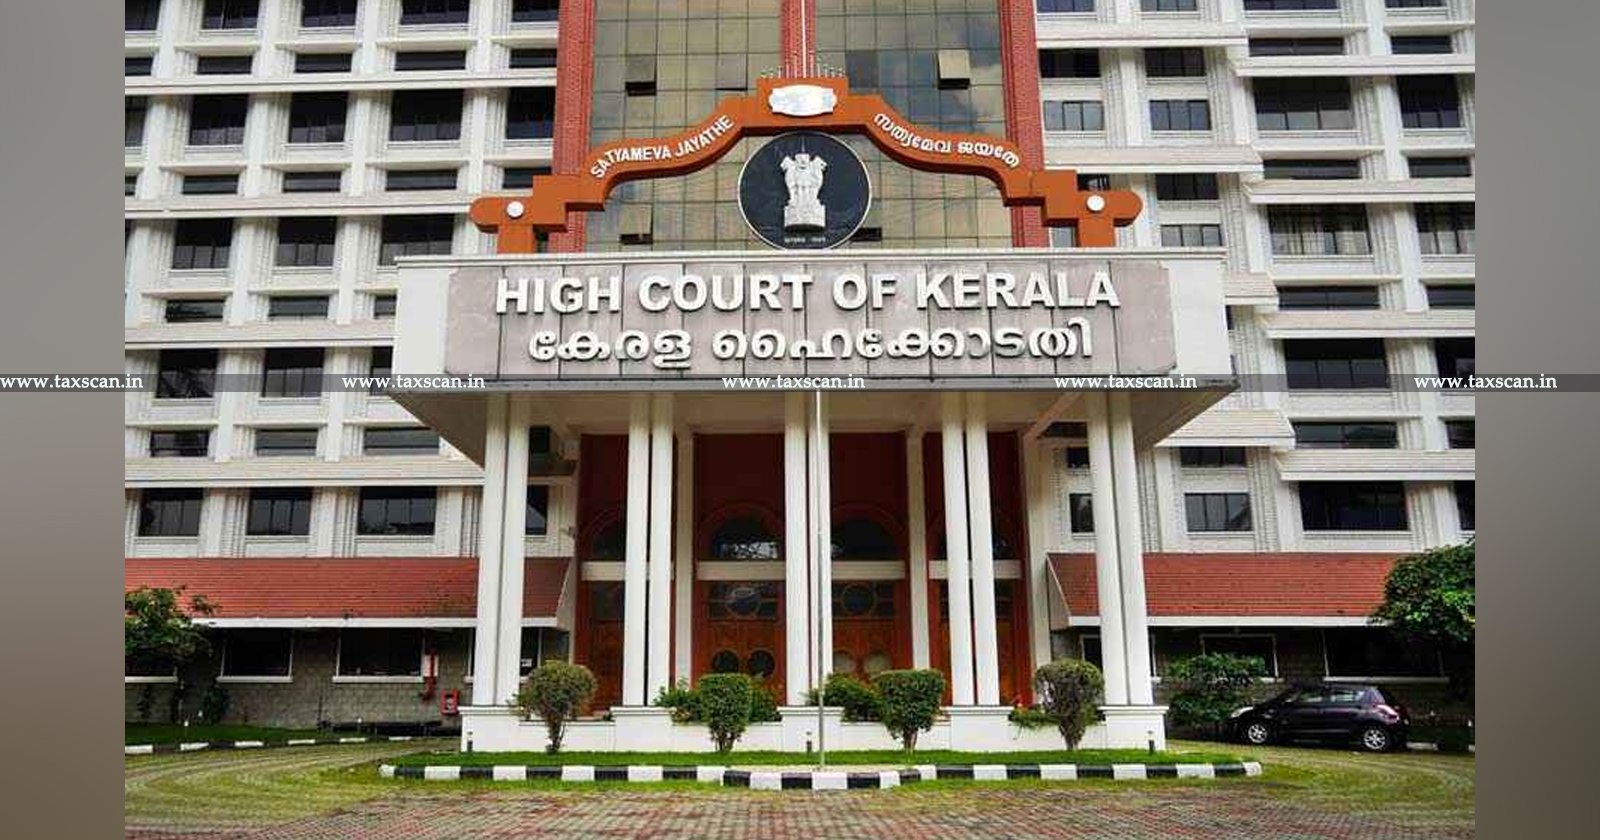 Cheque Dishonour Case can be filed against Trust - Juristic Person - Cheque Dishonour Case - Kerala HC - taxscan